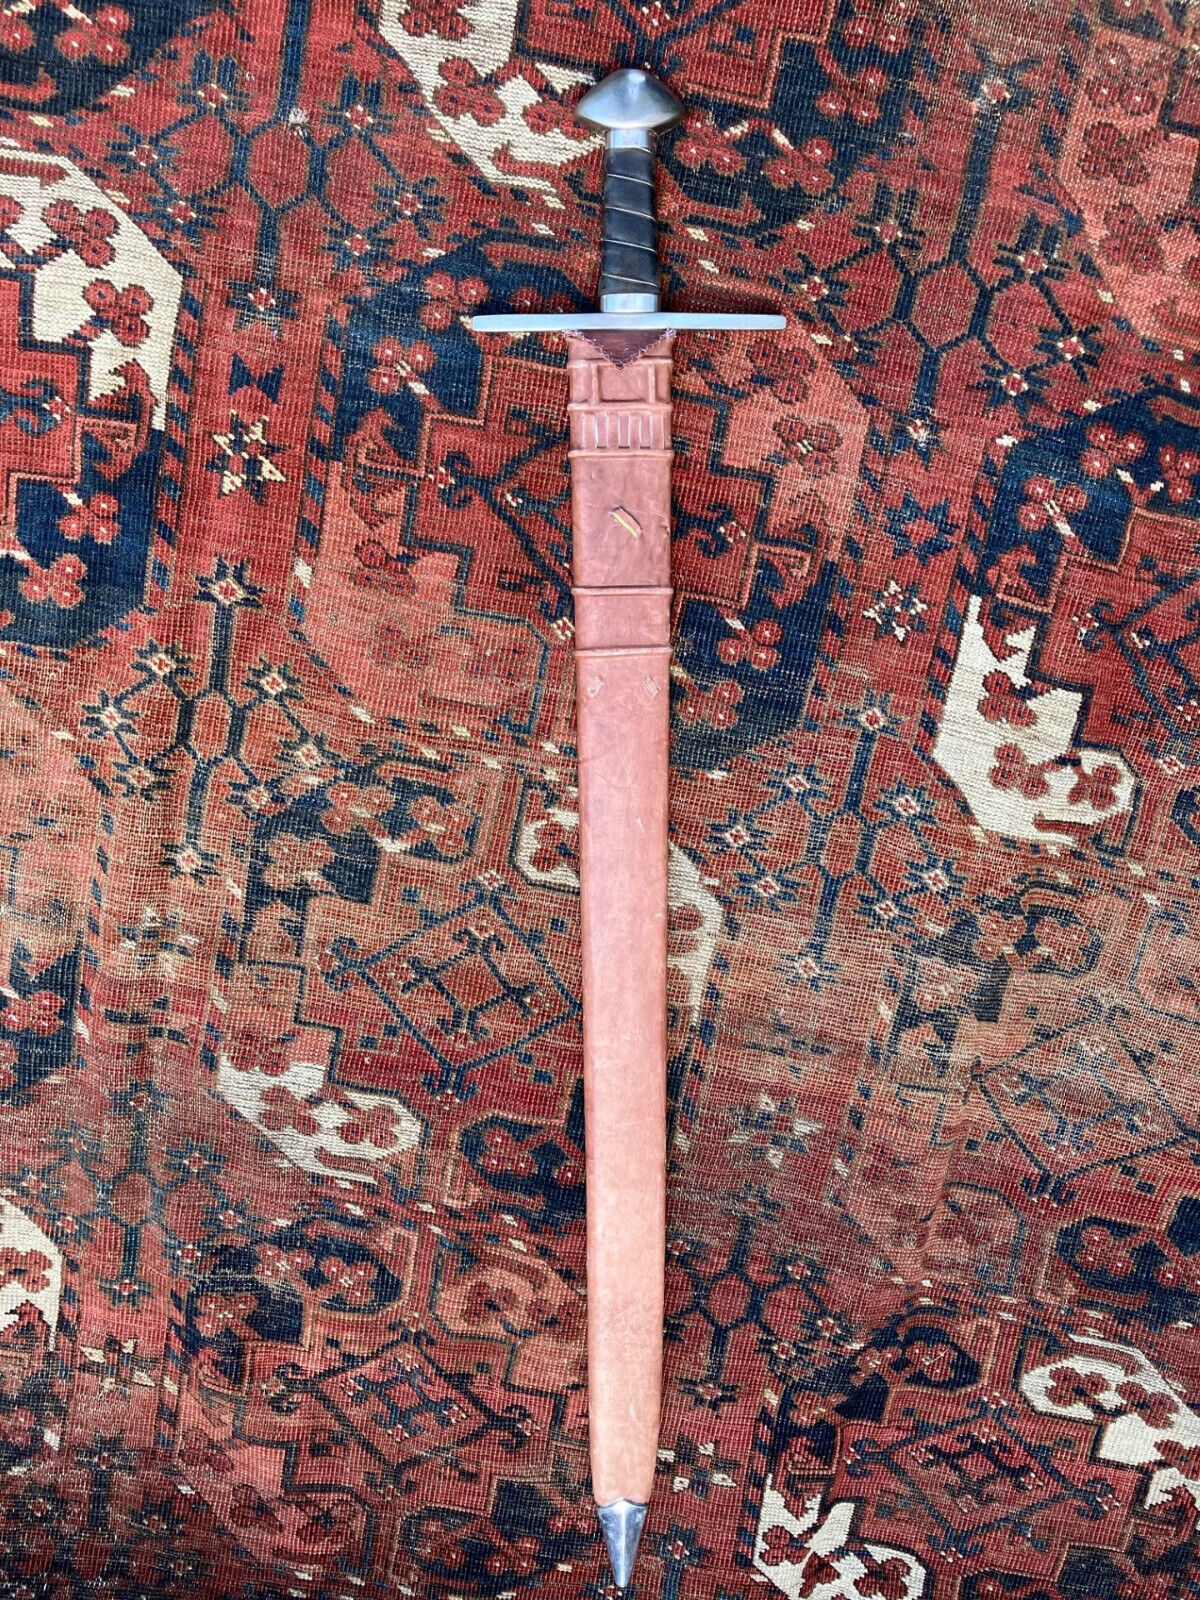 Medieval Norman Longsword replica with scabbard